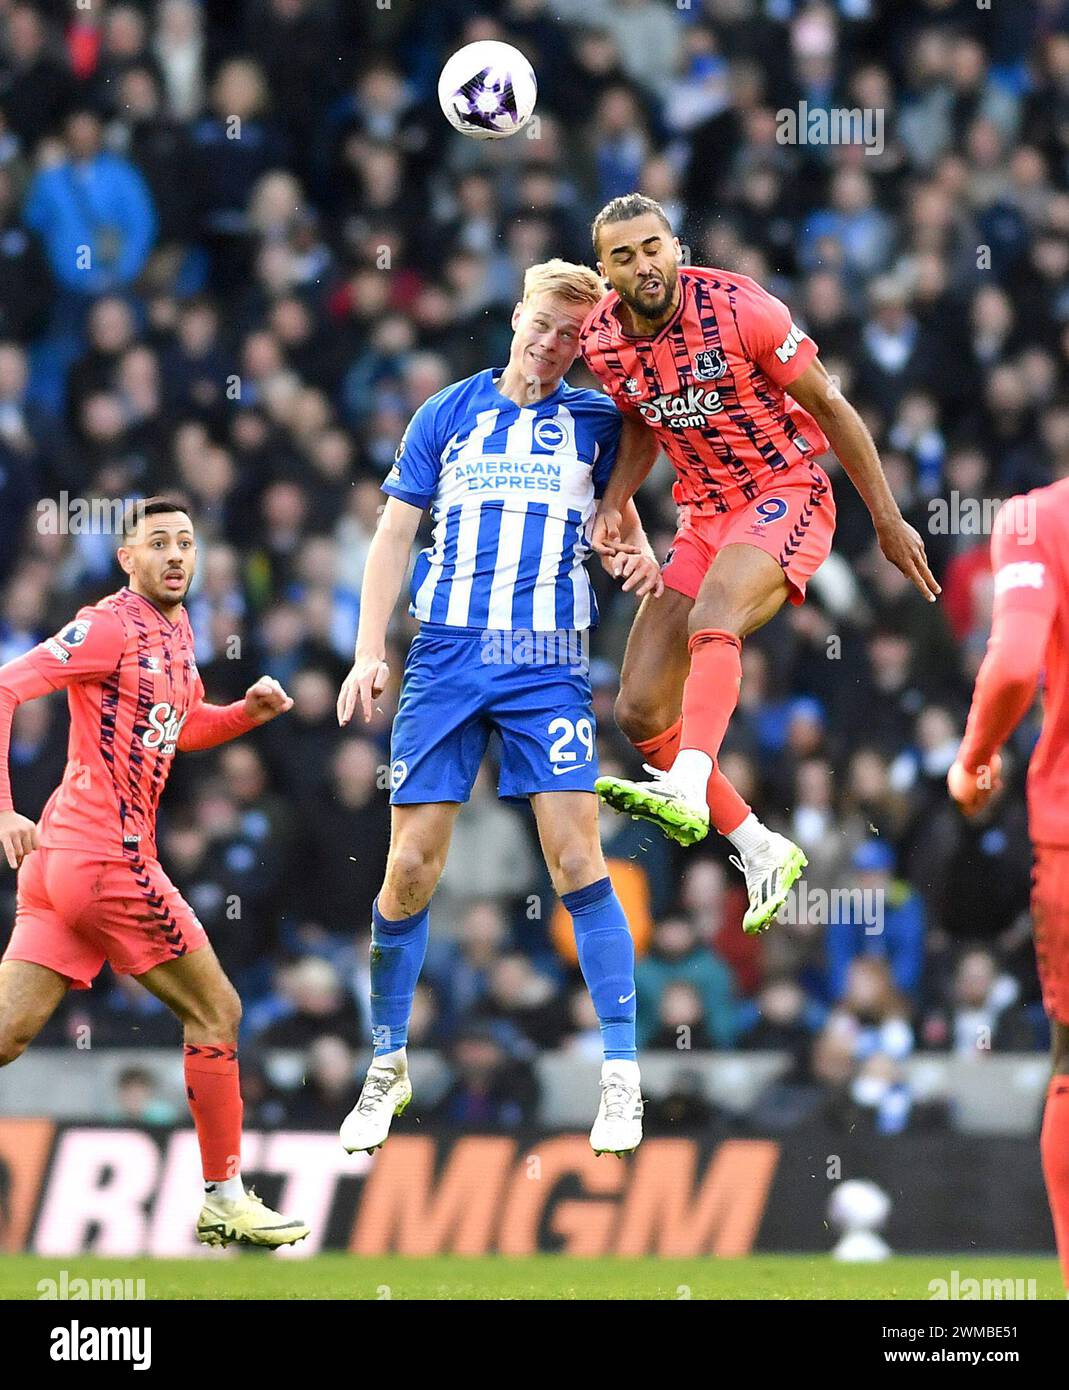 Dominic Calvert-Lewin of Everton battles with Jan Paul van Hecke of Brighton in the air during the Premier League match between Brighton and Hove Albion and Everton at the American Express Stadium  , Brighton , UK - 24th  February  2024  Photo Simon Dack / Telephoto Images Editorial use only. No merchandising. For Football images FA and Premier League restrictions apply inc. no internet/mobile usage without FAPL license - for details contact Football Dataco Stock Photo